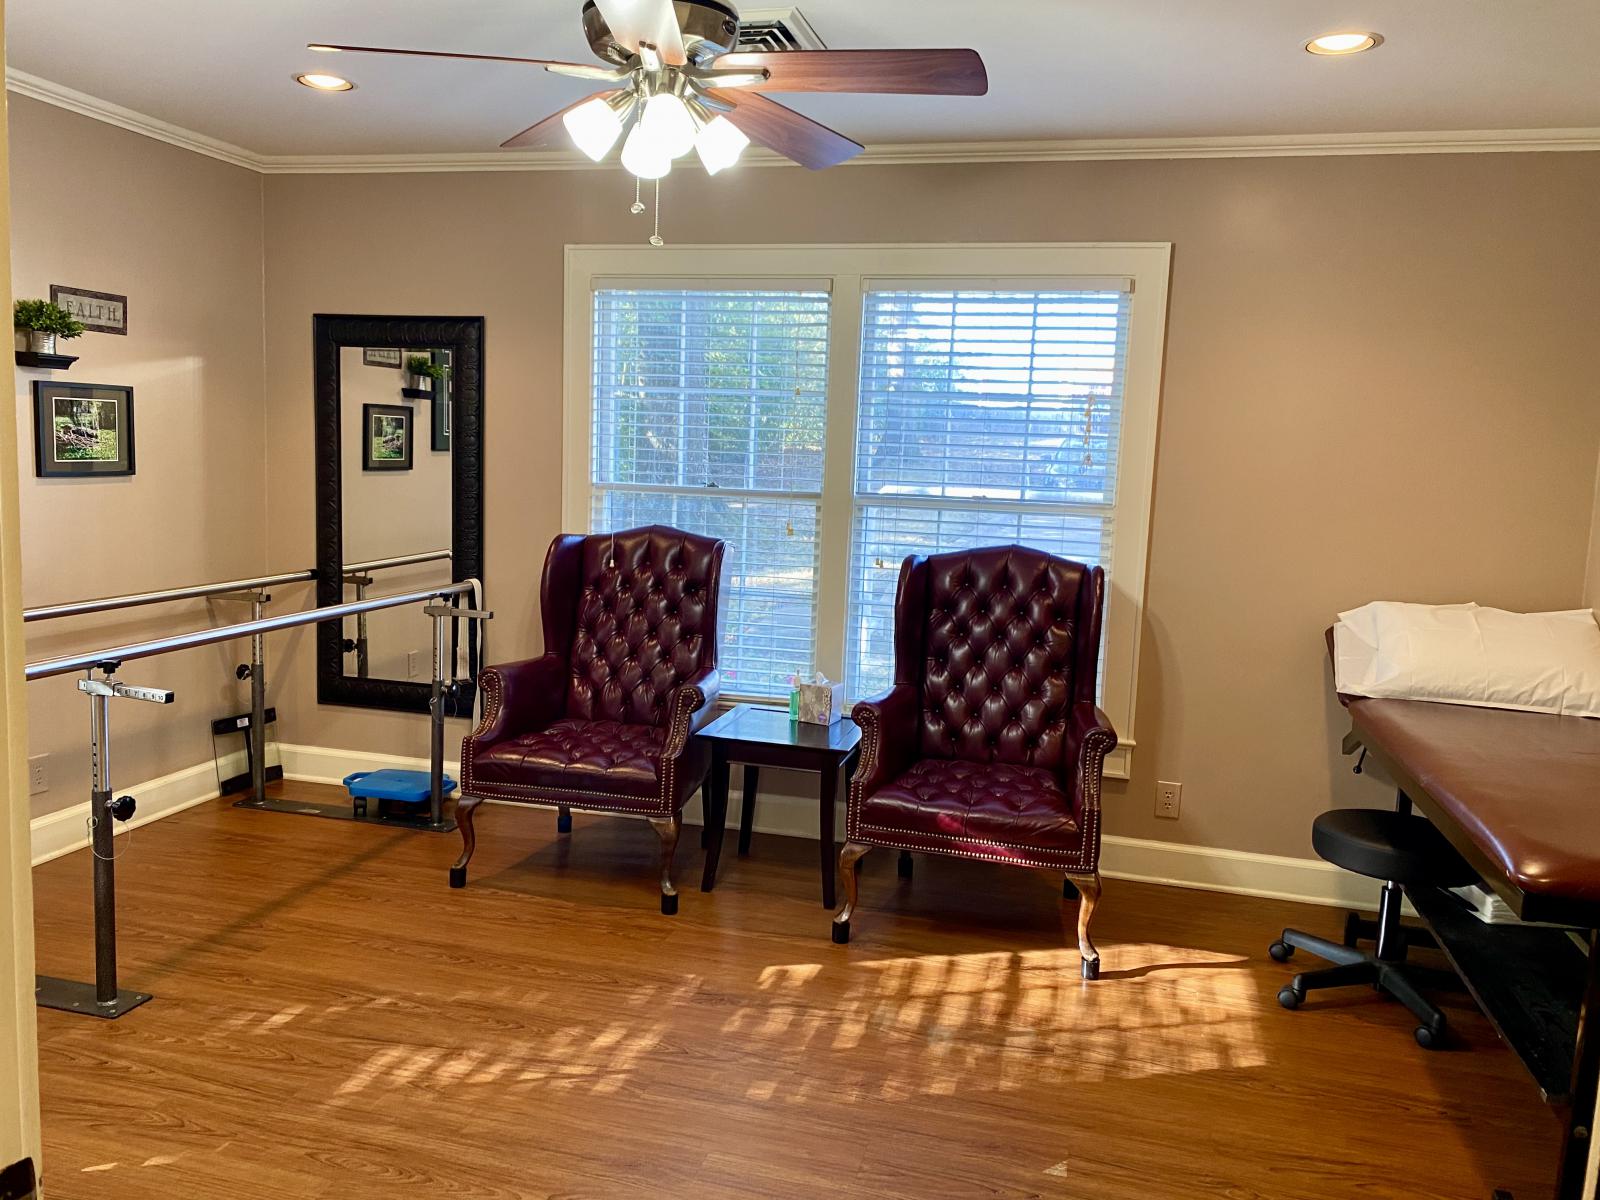 Patient room use for prosthetic and orthotic evaluations and fittings.